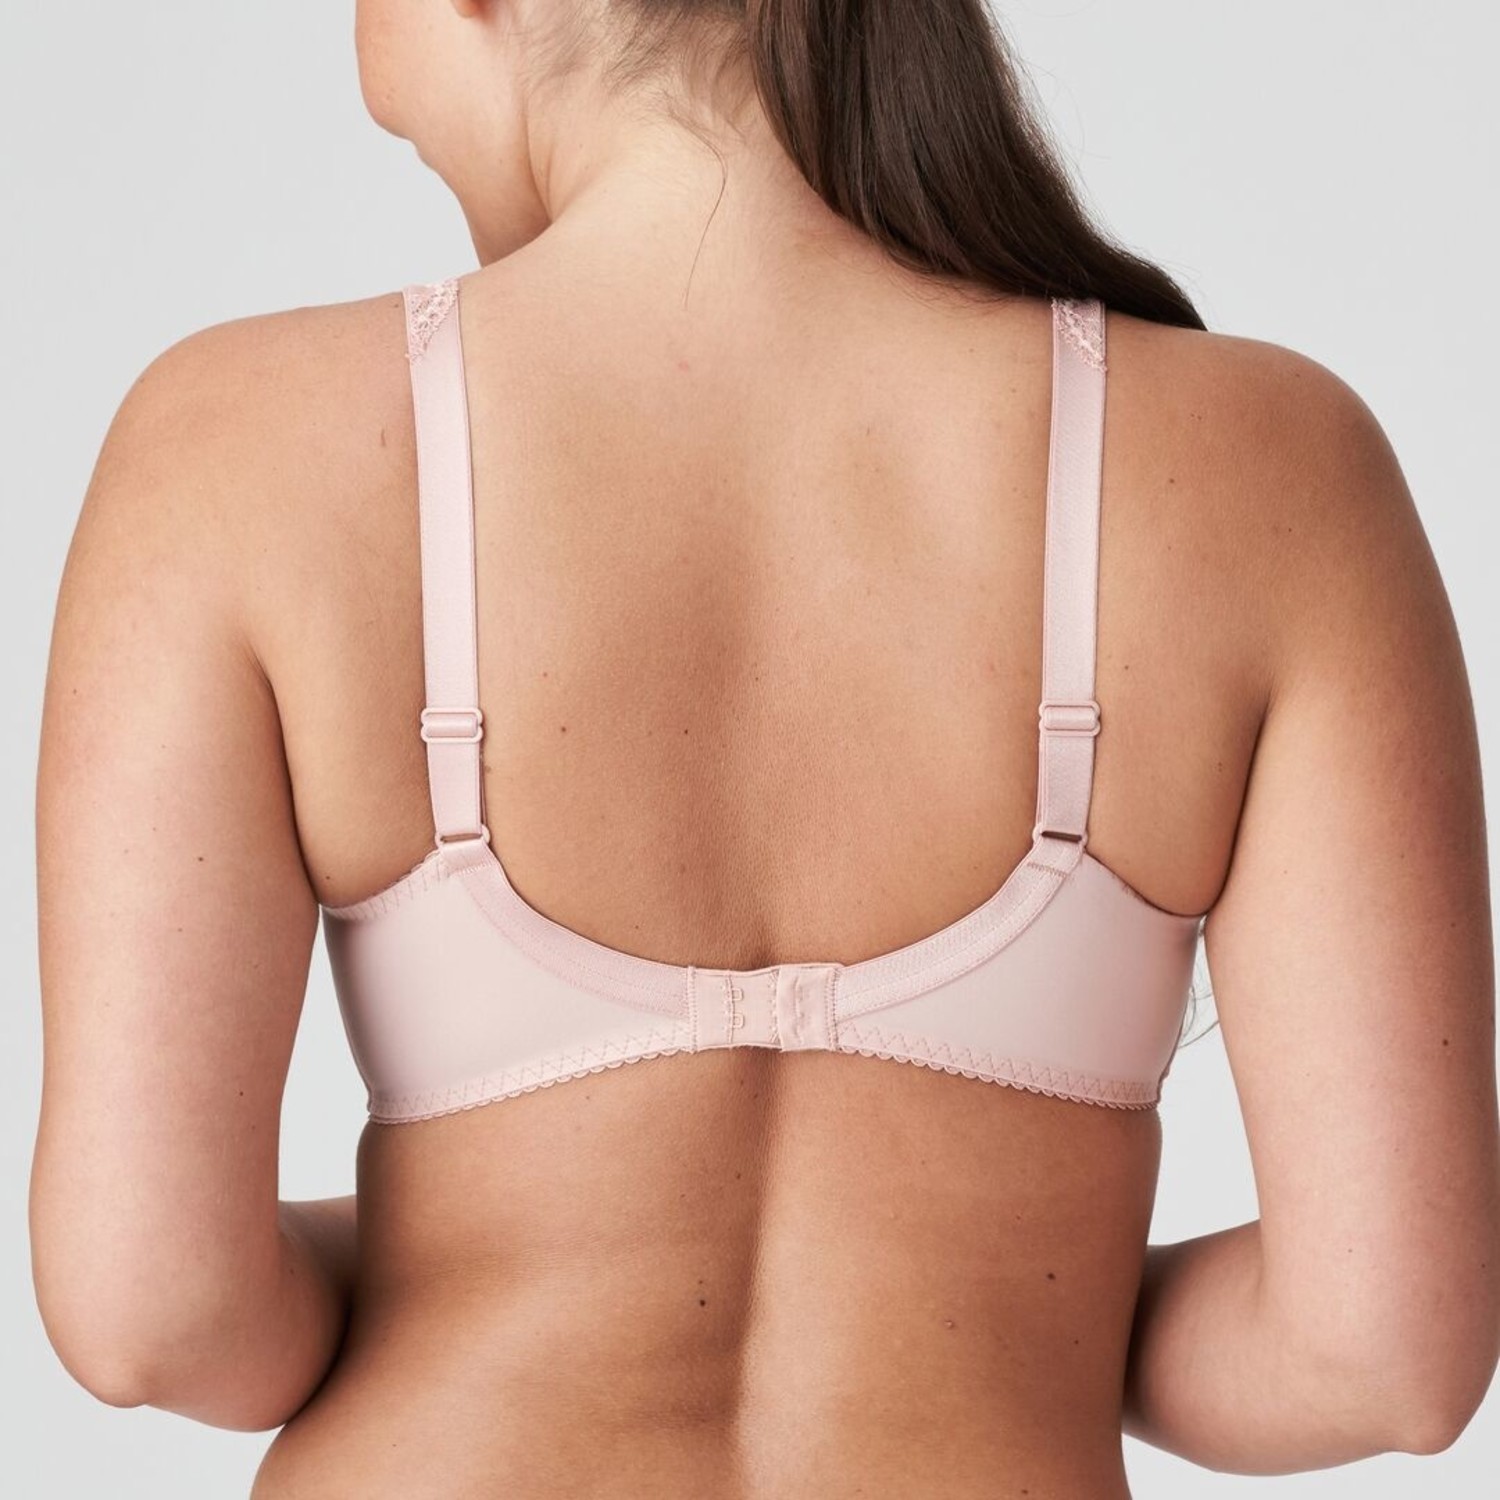 Madison Full Cup Bra 0162120/1 Powder Rose - Lace & Day